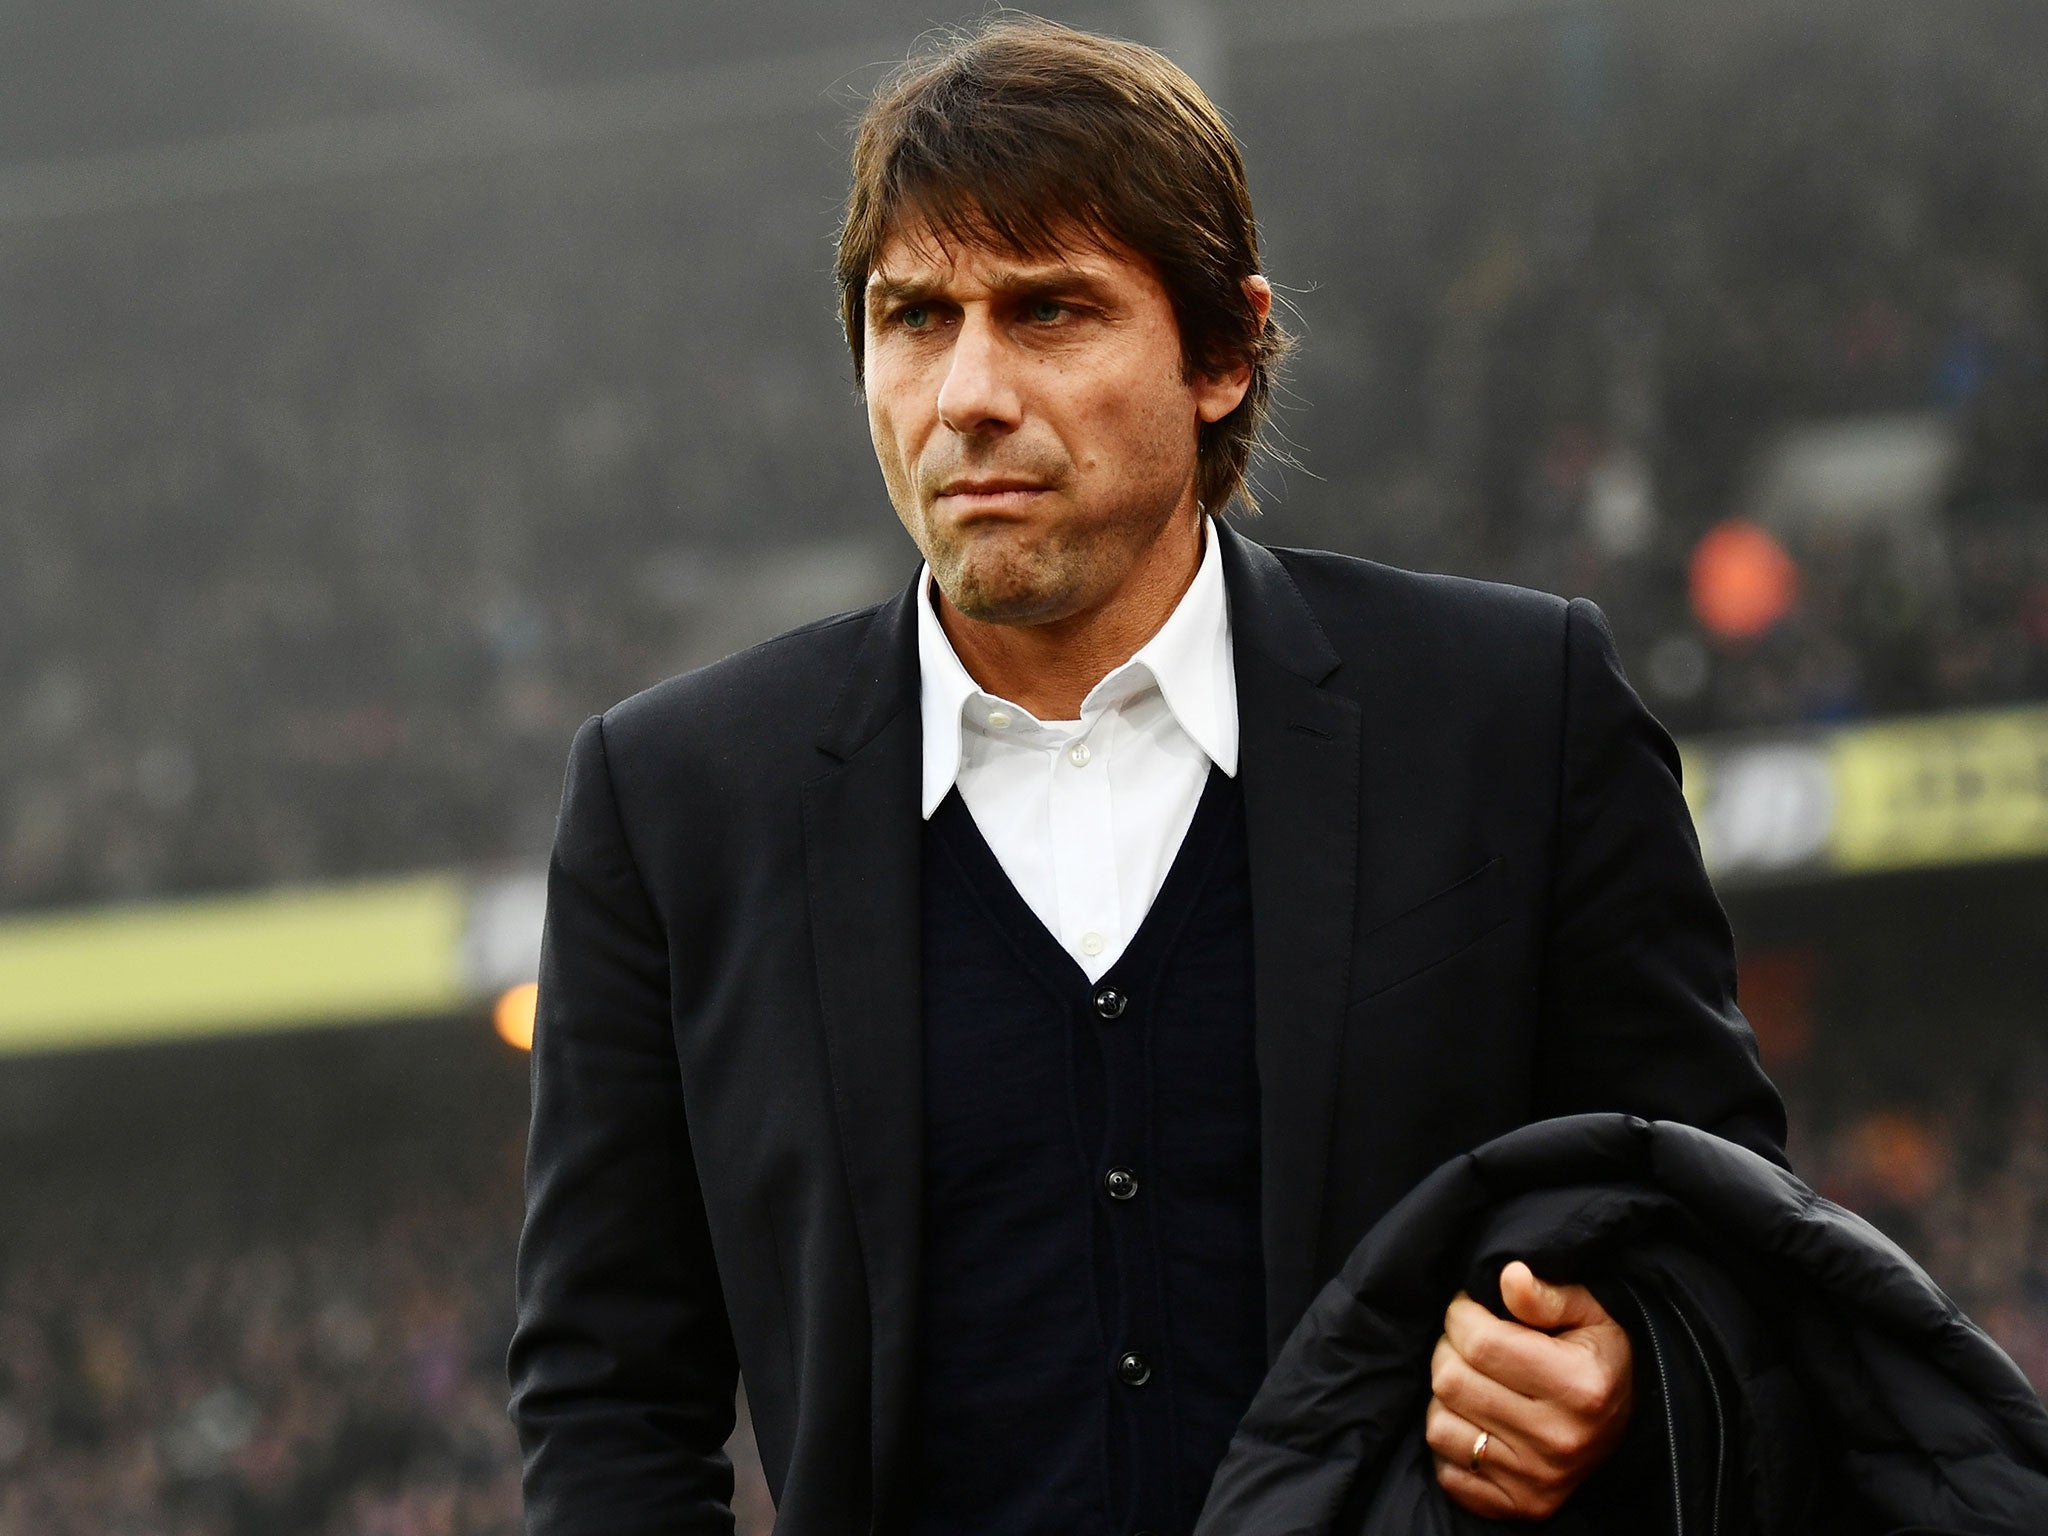 Antonio Conte's tactical nous have helped guide Chelsea to the top of the table